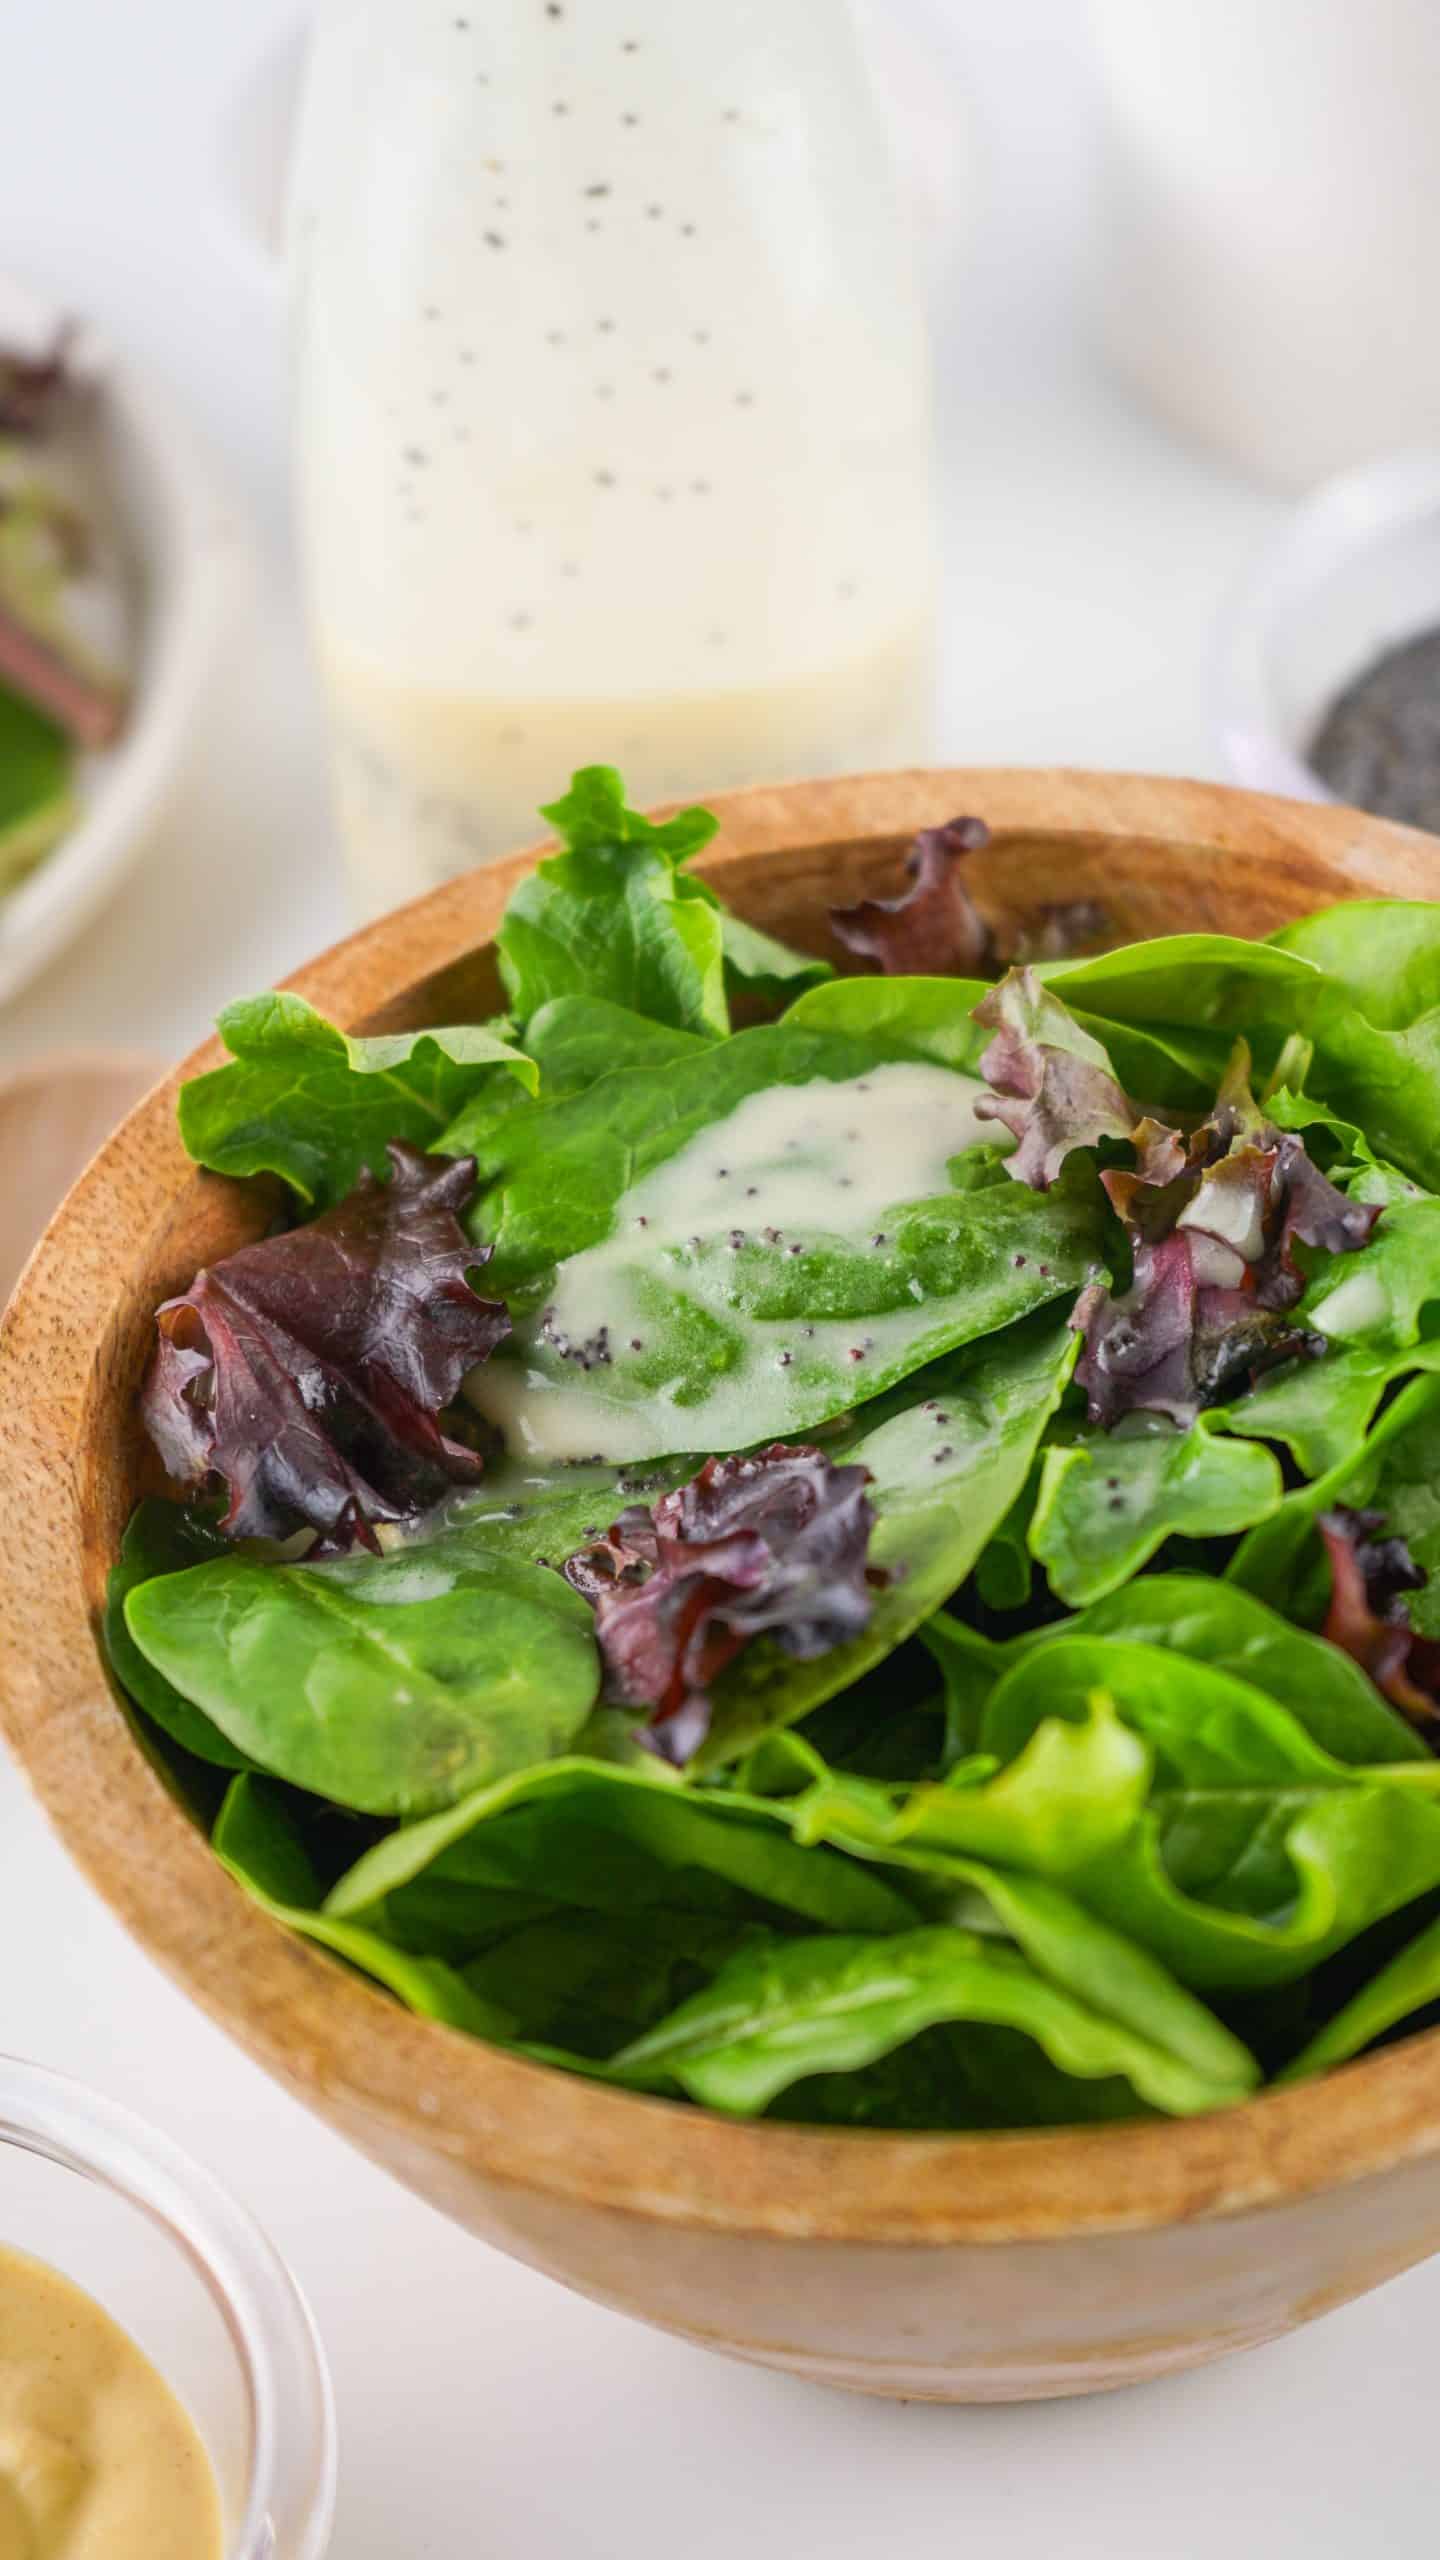 creamy poppy seed dressing on salad greens in a wooden bowl